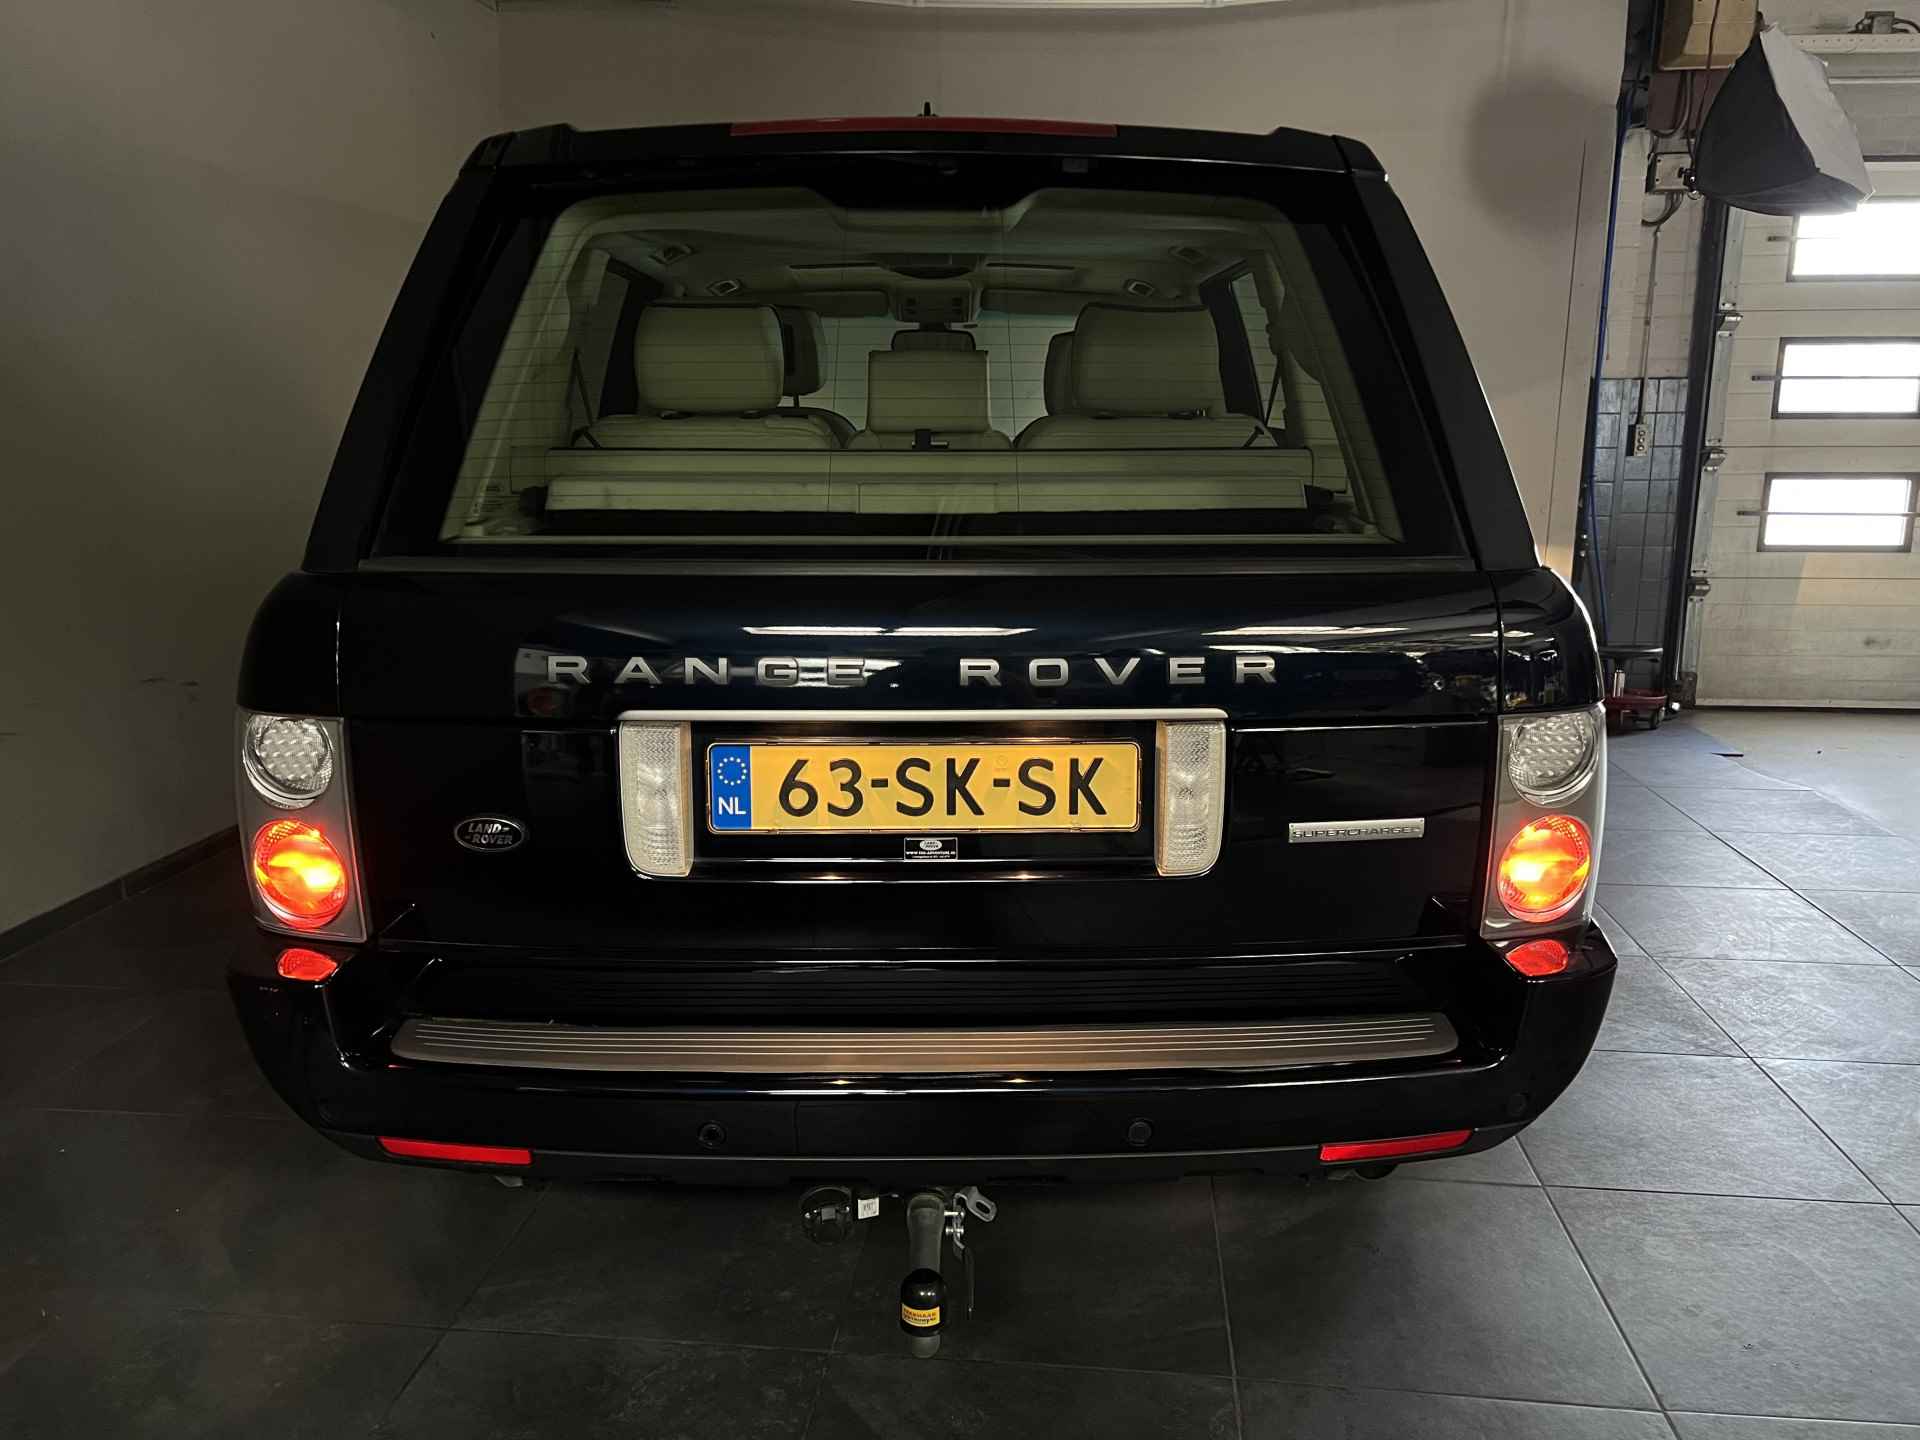 Land Rover Range Rover 4.2 V8 Supercharged ✅UNIEKE STAAT✅Airco✅Cruise controle✅Navigatie✅5 deurs✅TREKHAAK - 18/52